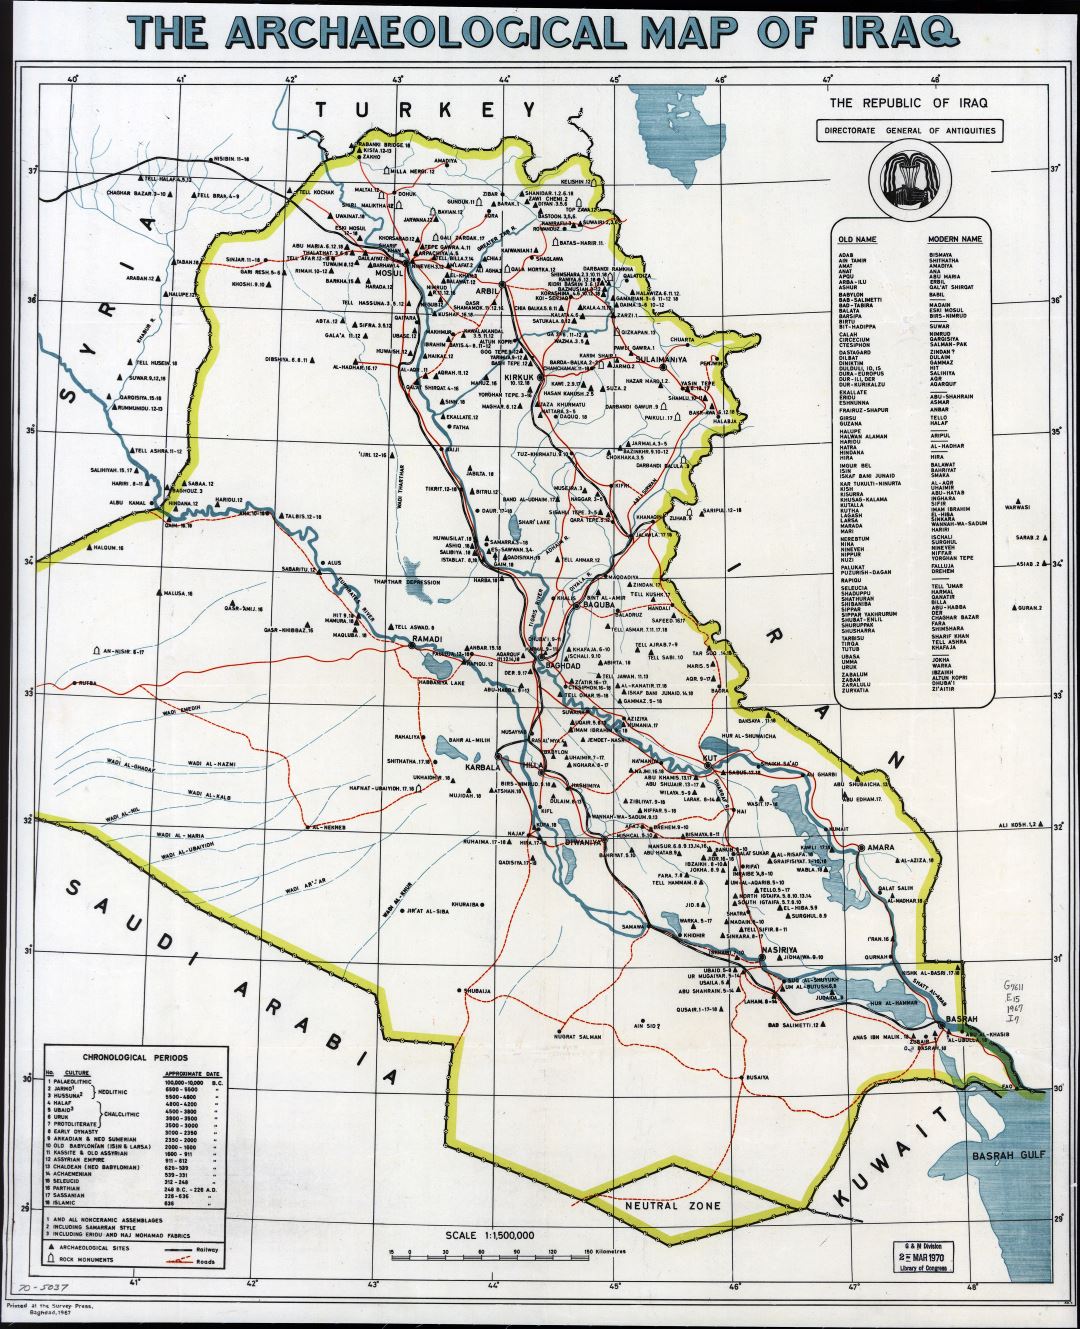 Large scale archaeological map of Iraq - 1967